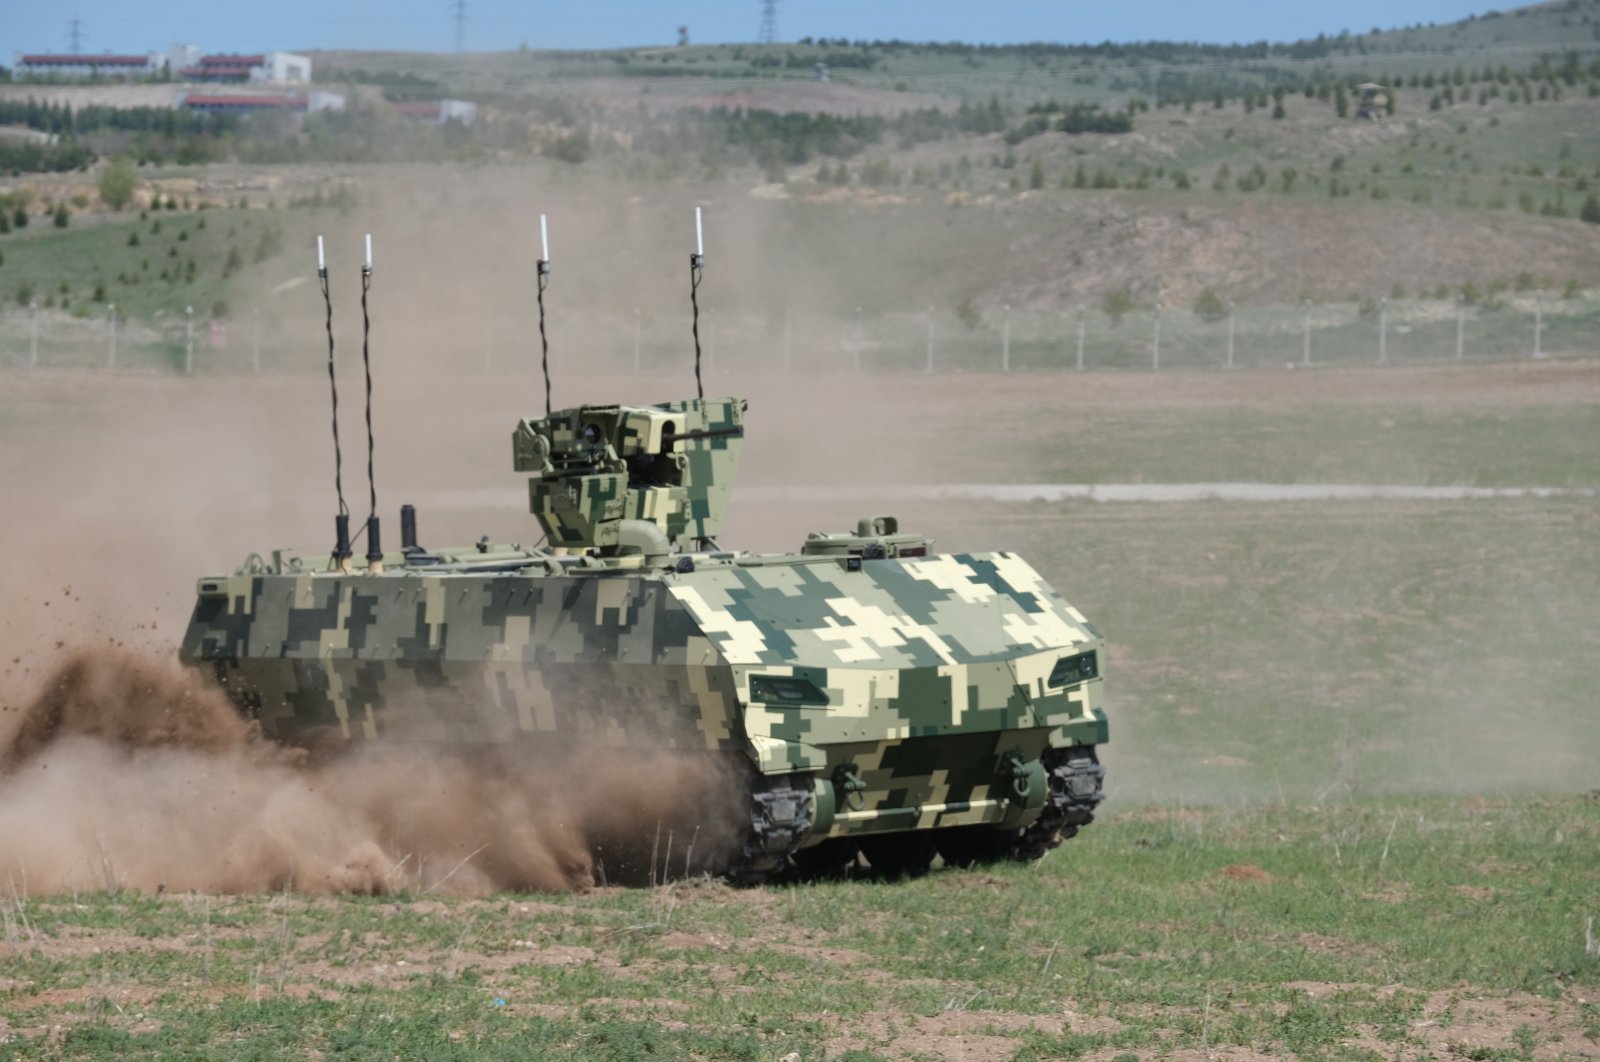 An unmanned ground vehicle prototype developed by FNSS is seen in this photo provided on July 29, 2022. (Courtesy of FNSS)